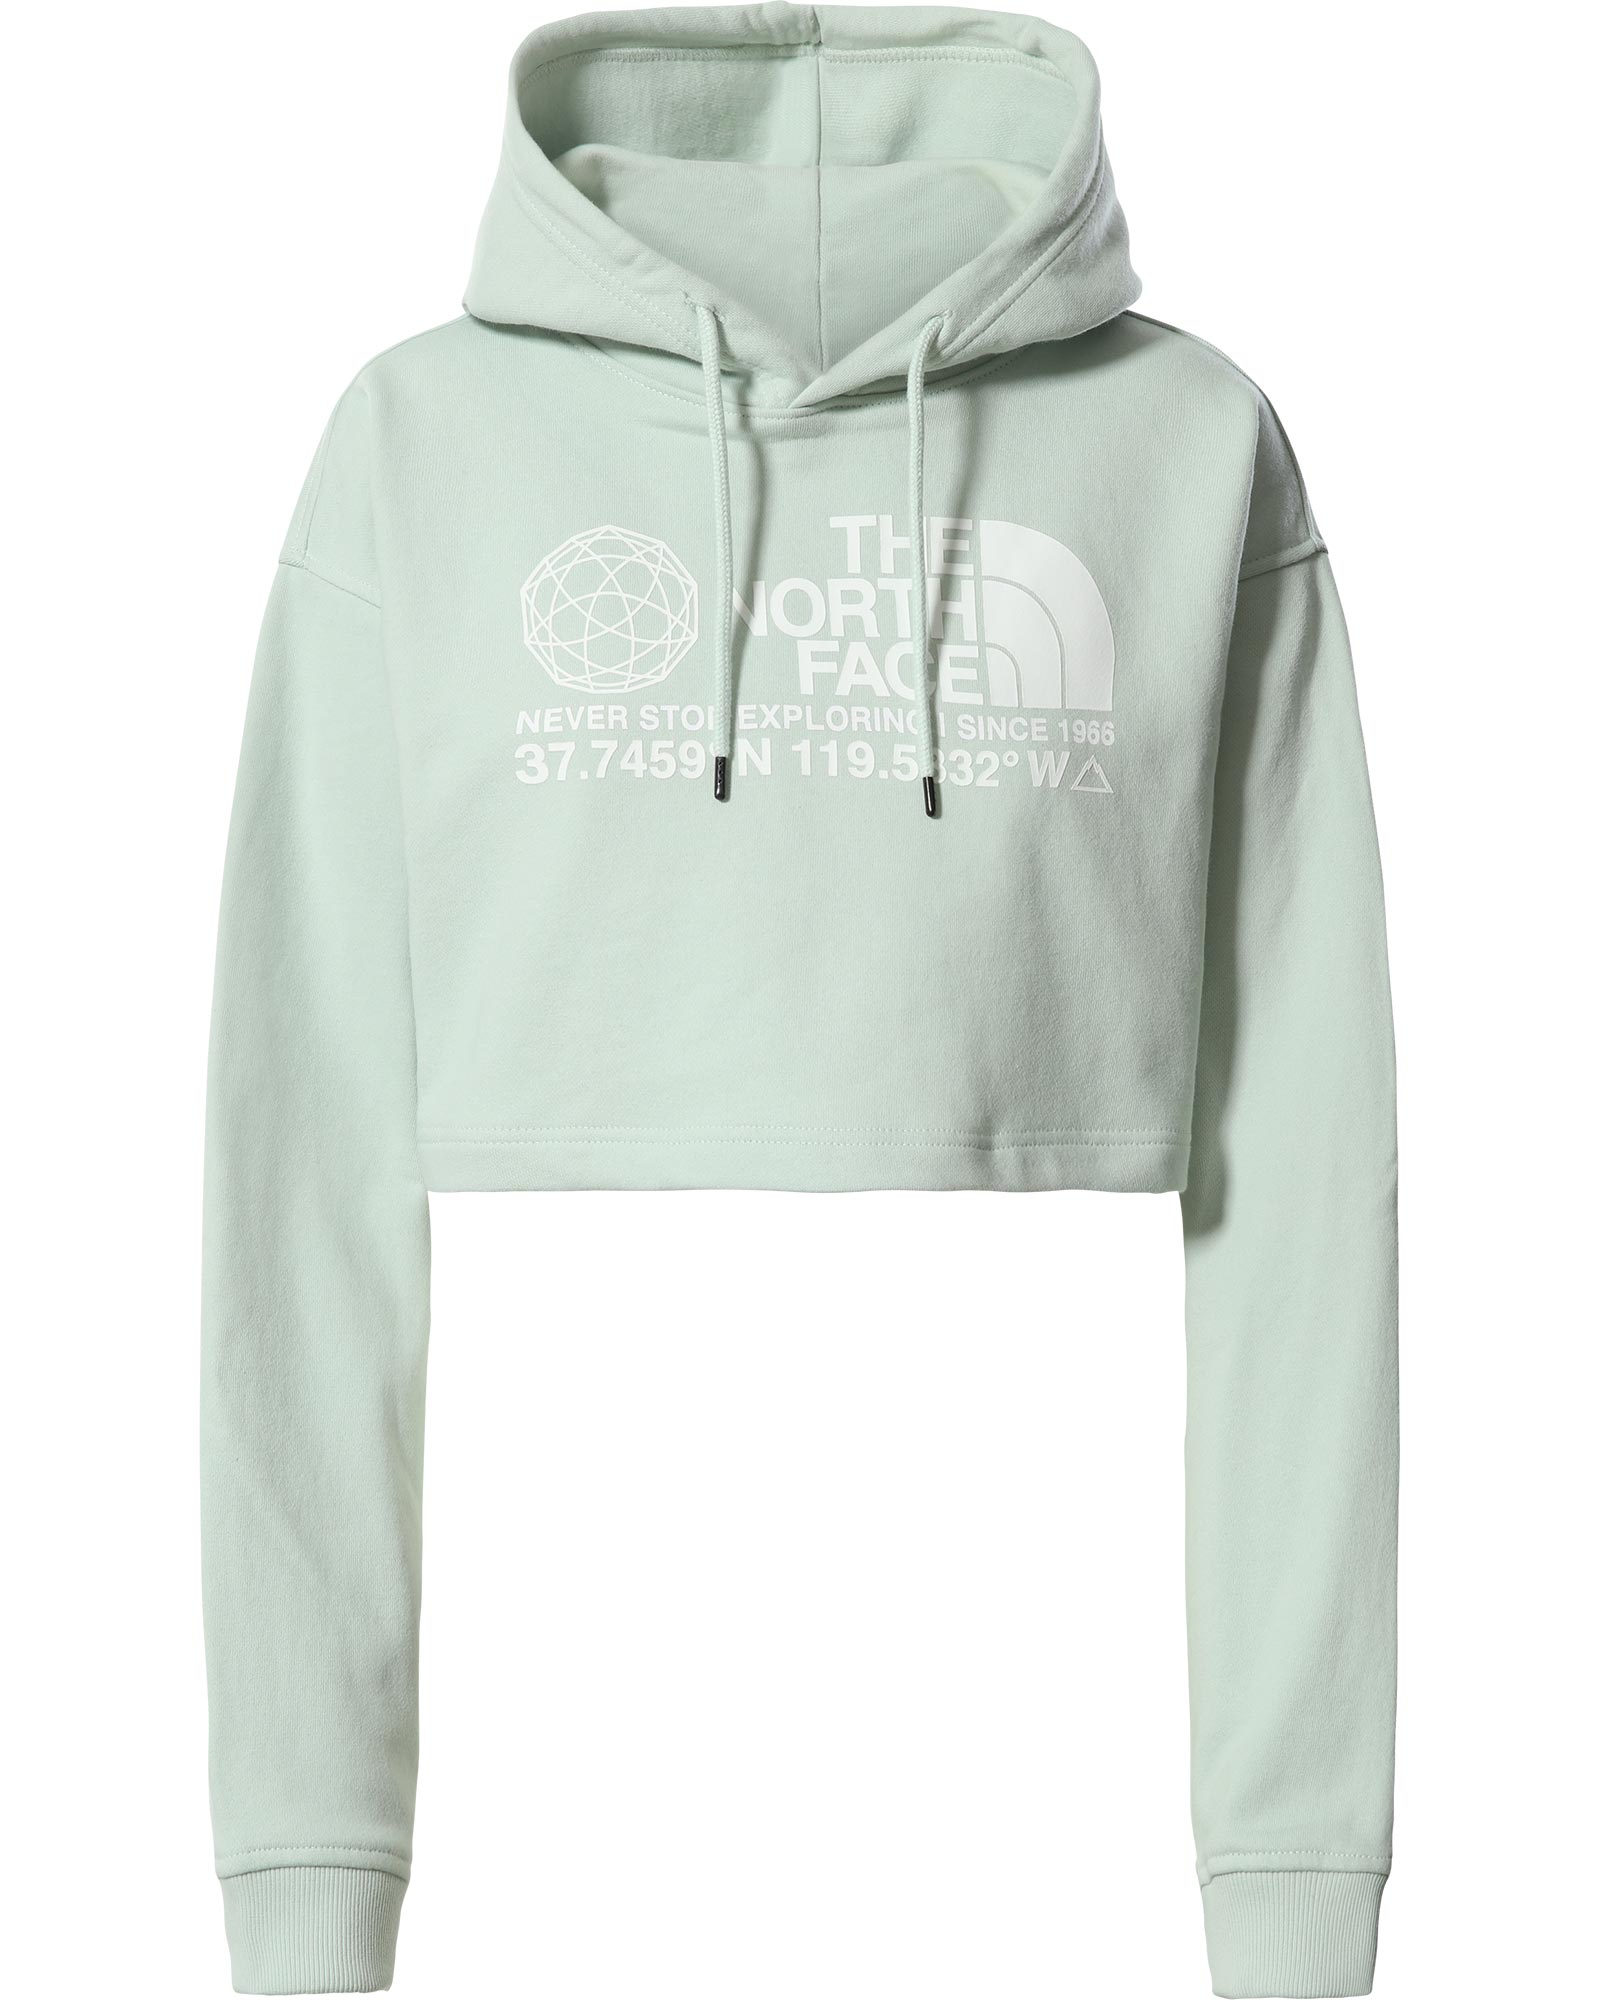 The North Face Coordinates Crop Drop Pullover Womens Hoodie